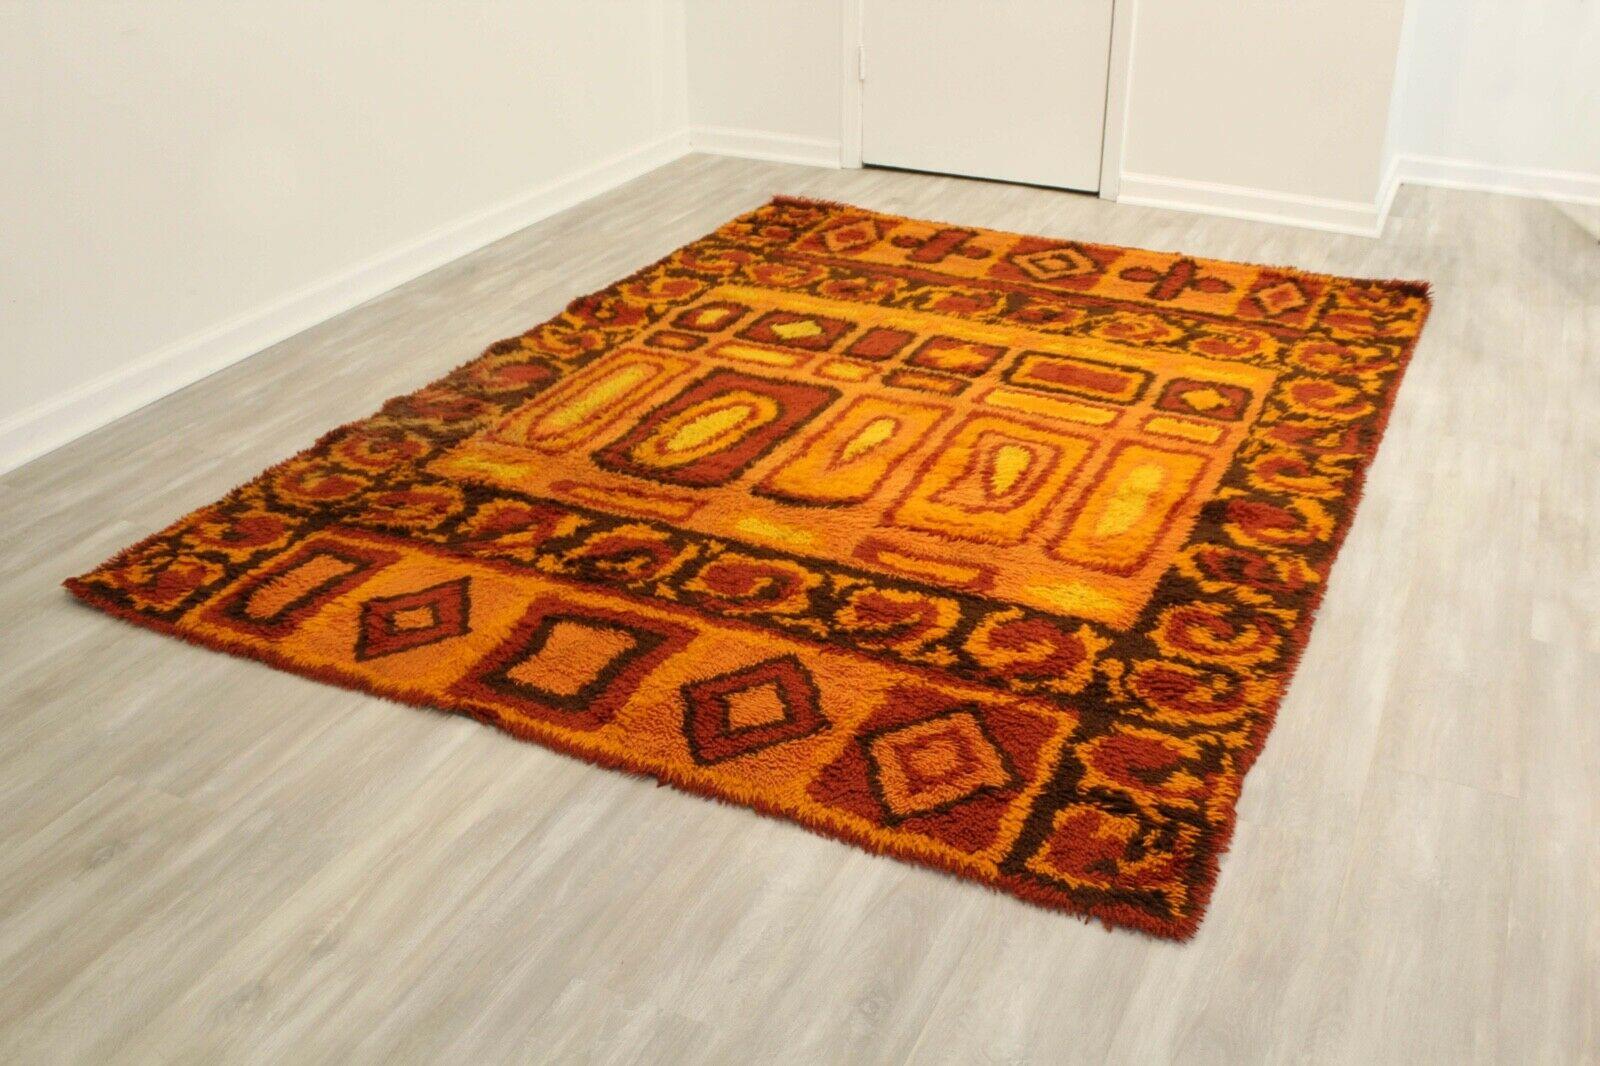 Twisted yarns in warm tones of red, orange and yellow detail this mid century modern area Rya rug, made in Finland. The abstract pattern and colors offers a focal point for any Mid Century Modern or modern home. In good vintage